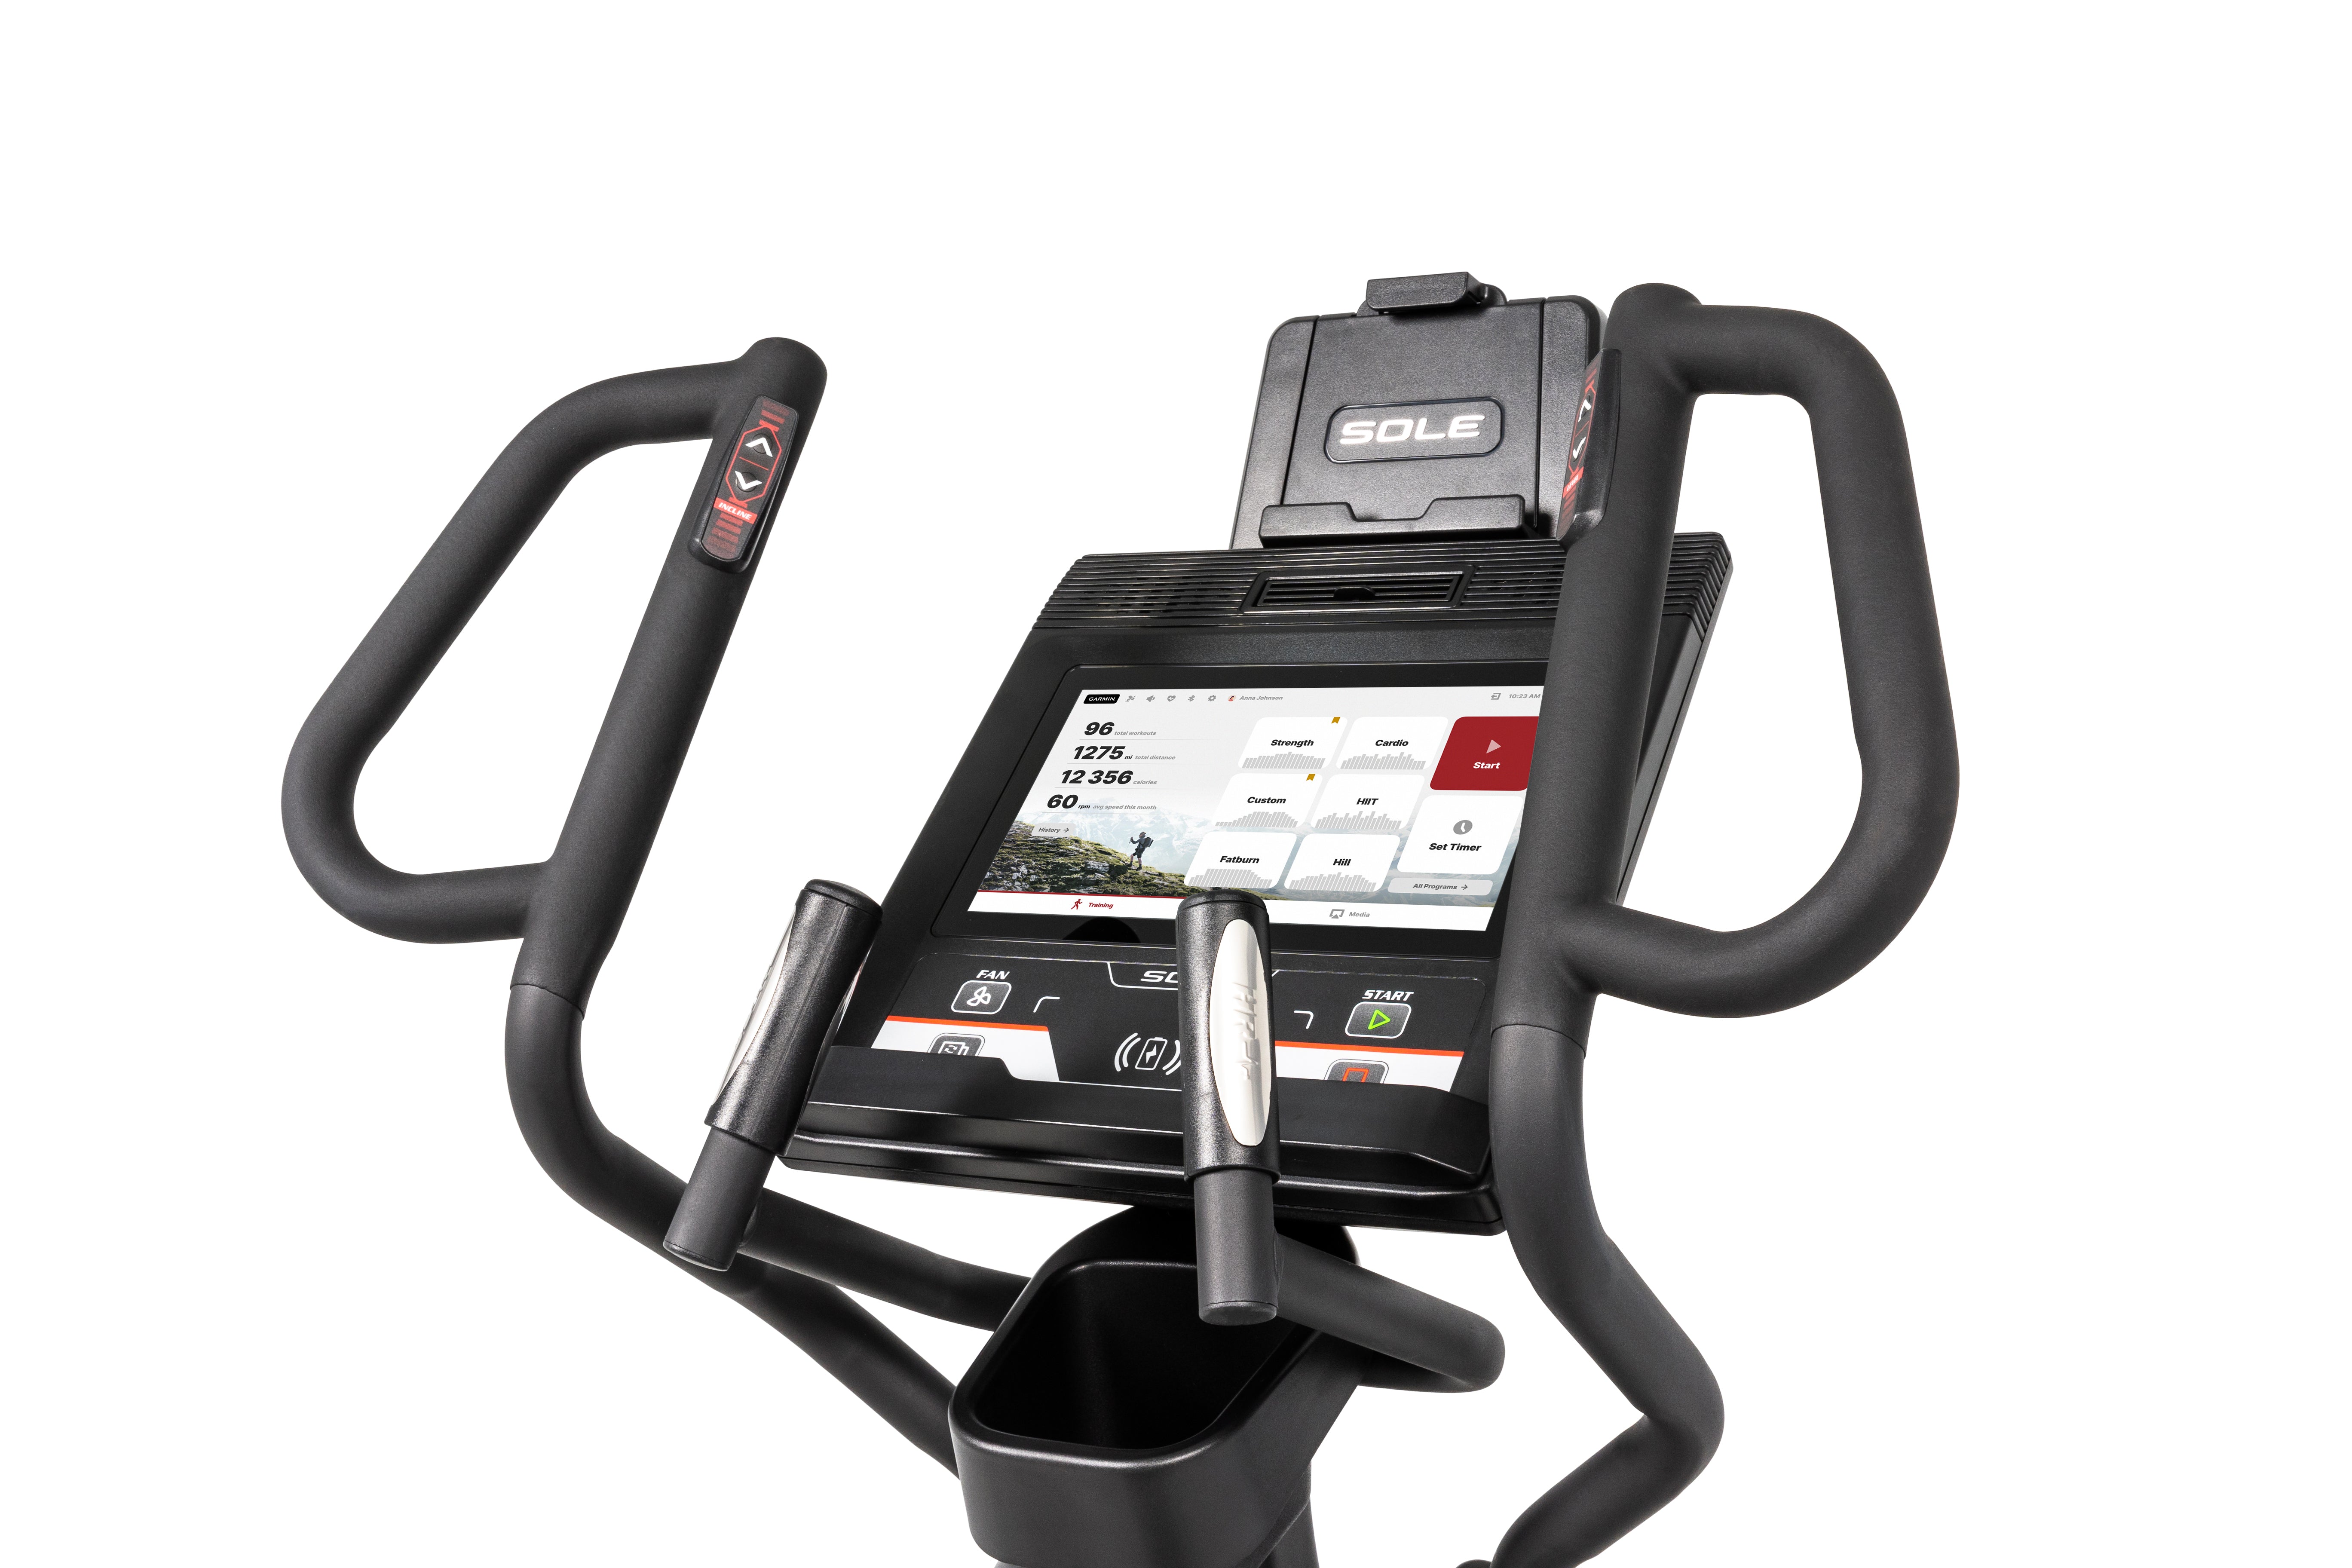 Angled close-up of the Sole E95 elliptical trainer showcasing the handlebars with control buttons and heart rate sensors, a detailed touchscreen display featuring various workout metrics, and the 'SOLE' branding on the upper tablet holder. The image also captures a portion of the stationary handle with grip and a cup holder beneath the console.